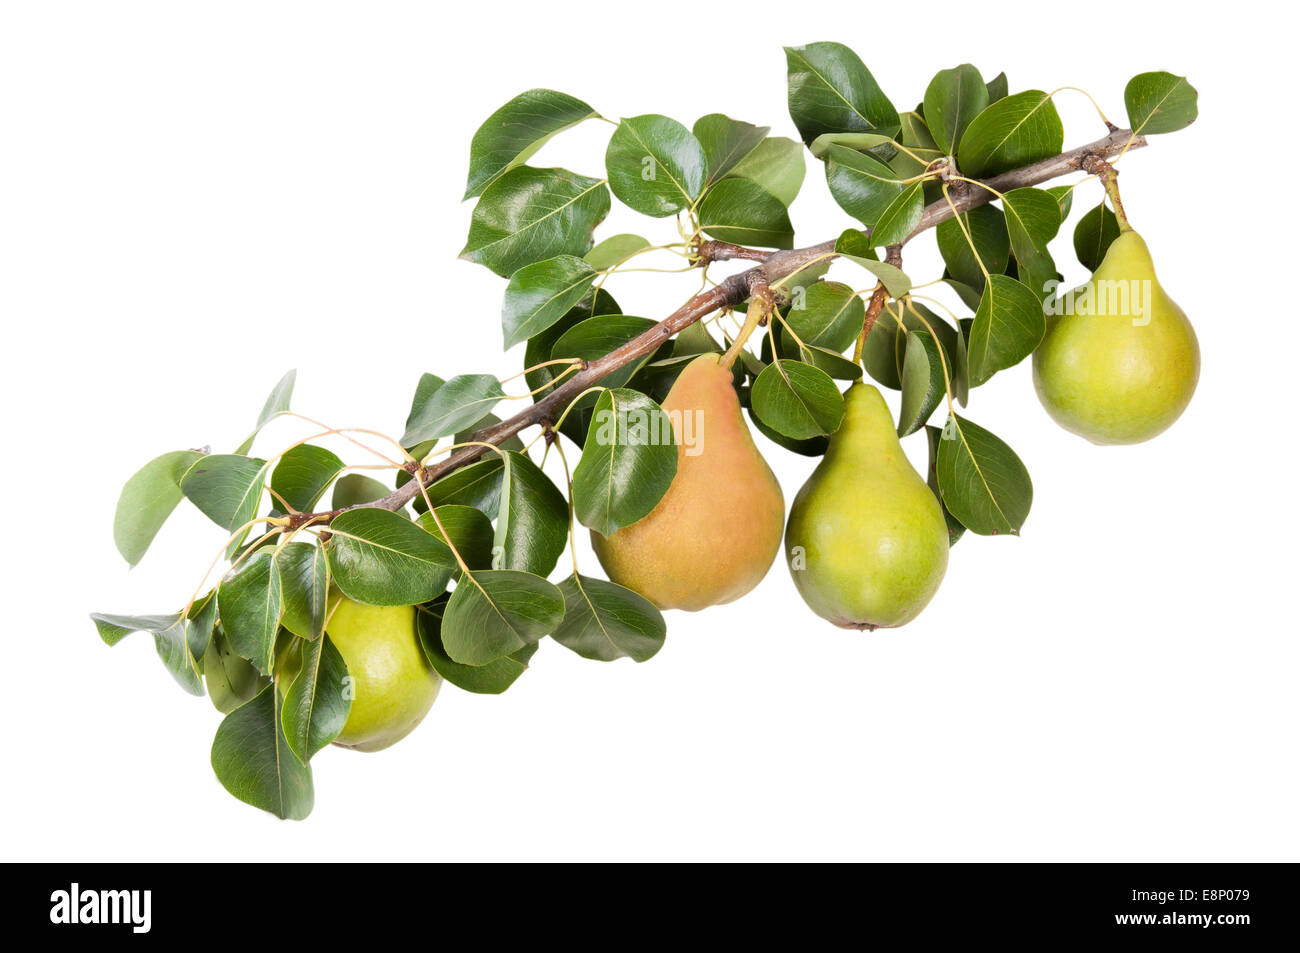 Juicy Pears On A Branch With Leaves Isolated On White Background Stock Photo